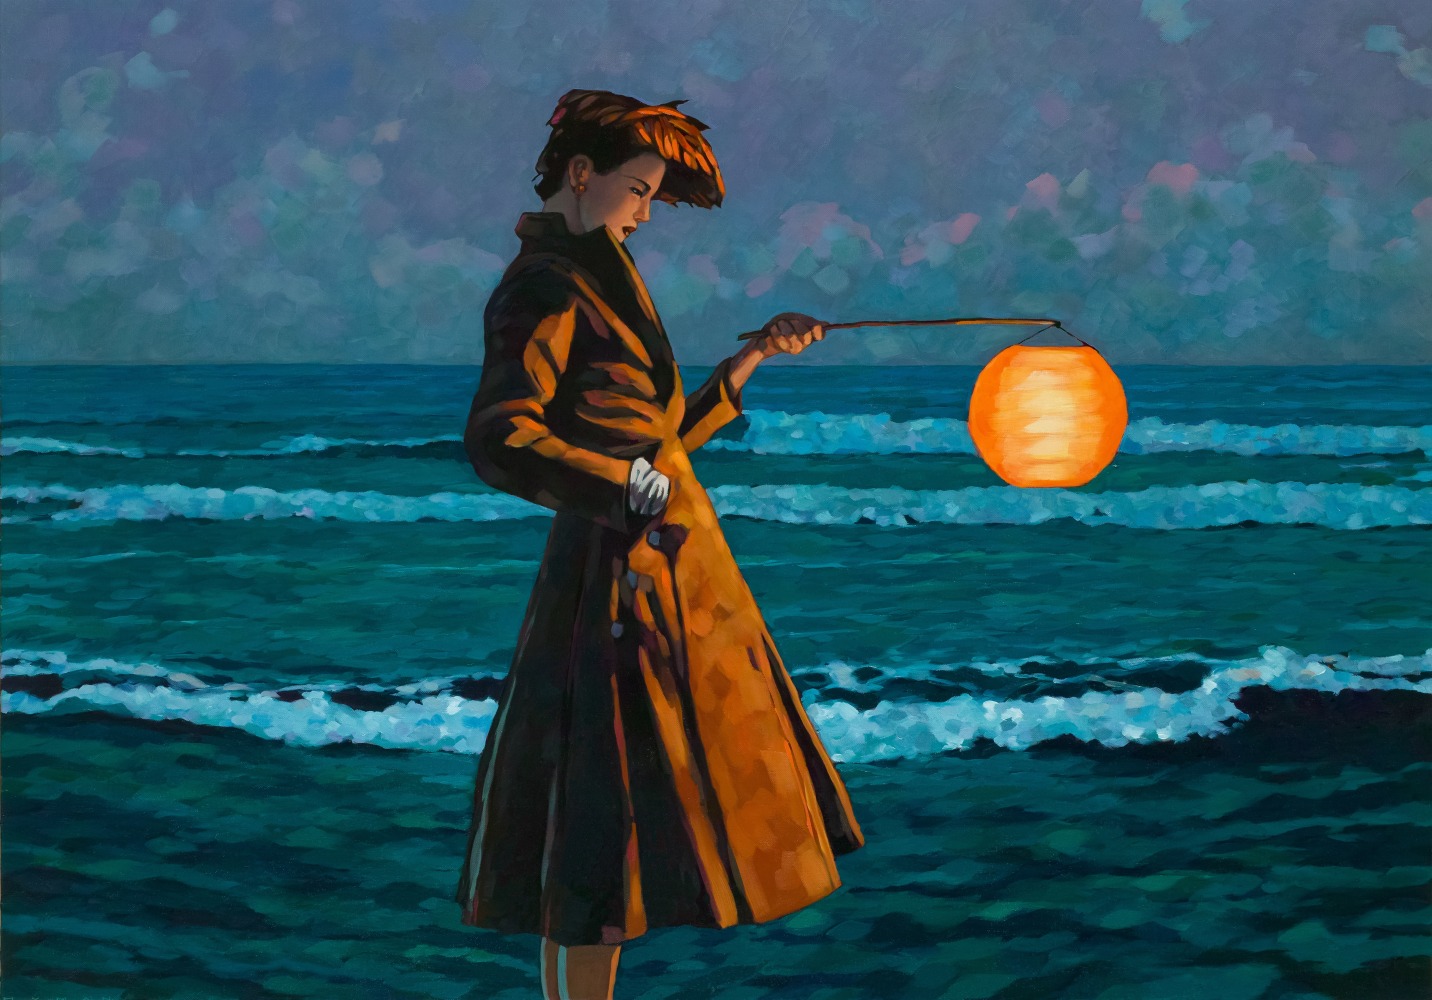 Miles Hyman

The Lamplighter, 2022

Oil on linen

32 x 45 3/4 inches

Sold